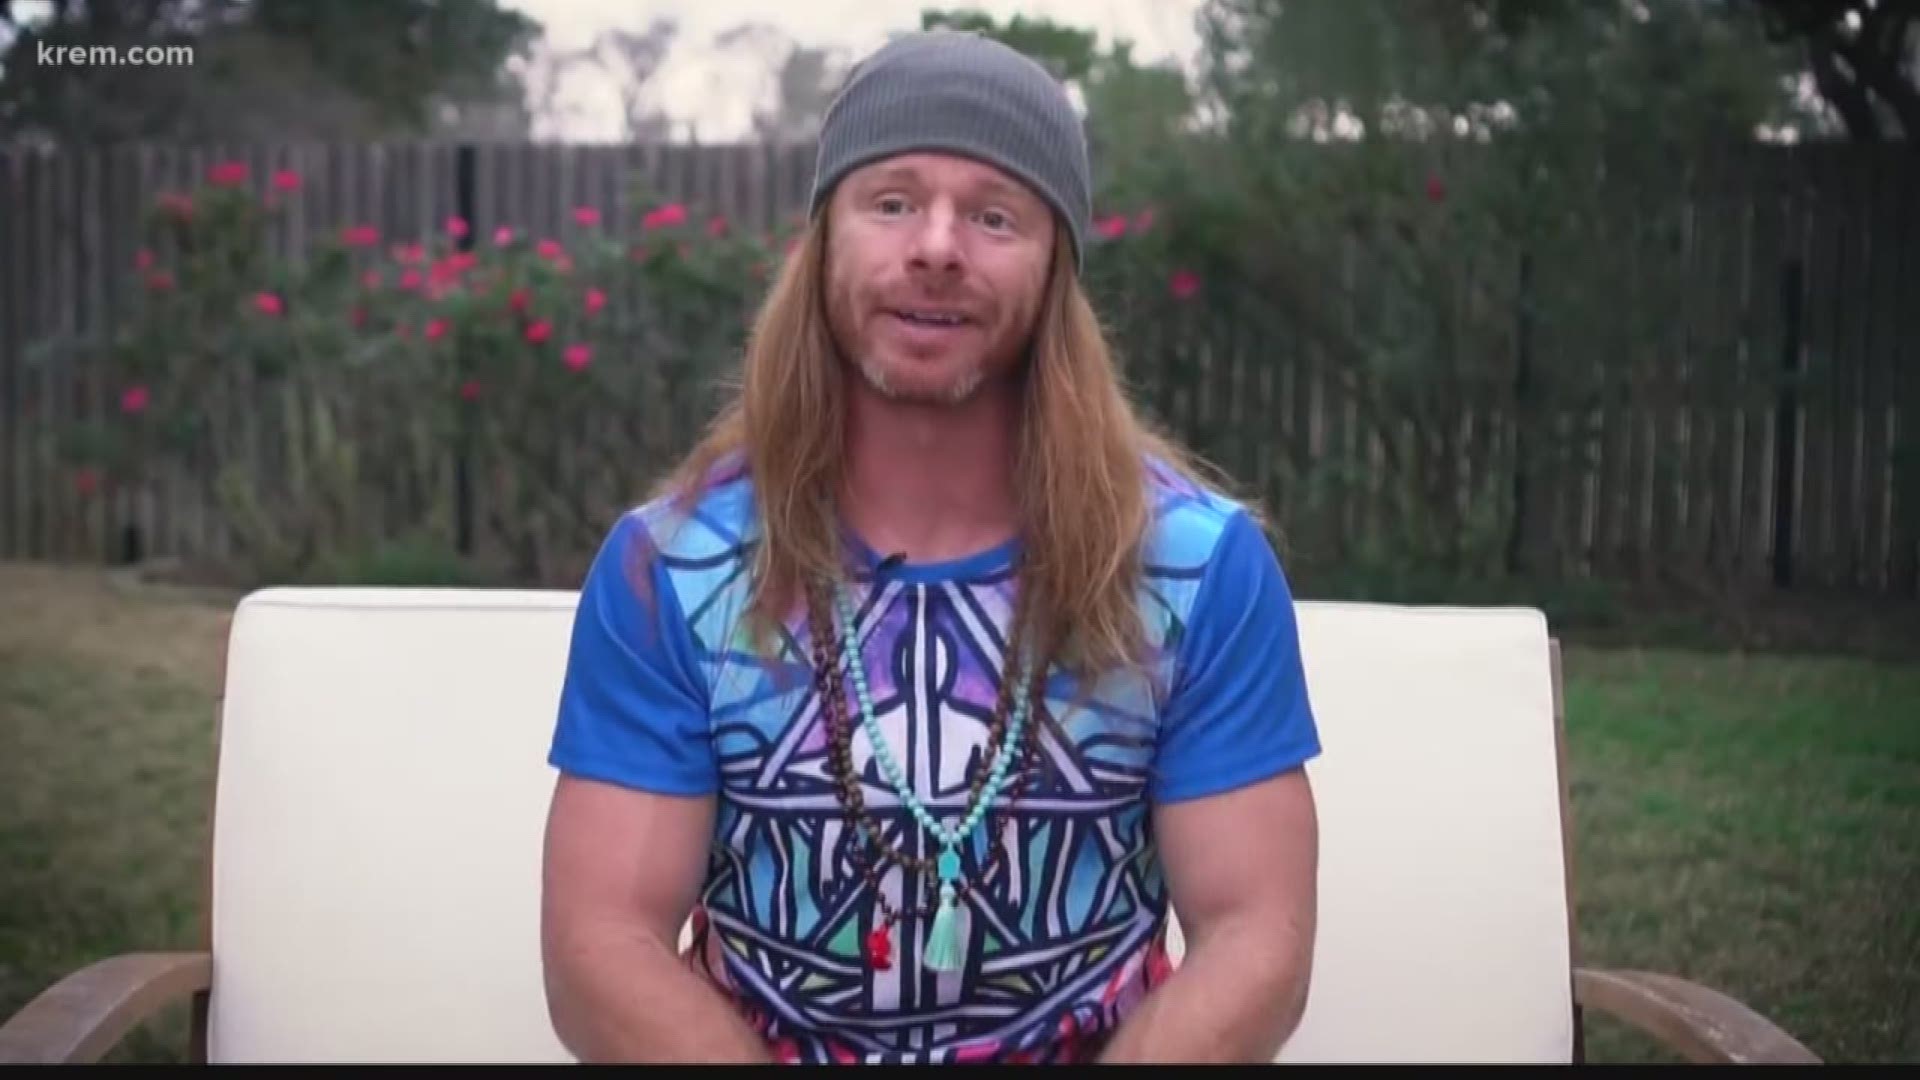 In a viral video, Comedian JP Sears poked fun at everything from Spokane residents' love of breweries to our frigid winter weather.